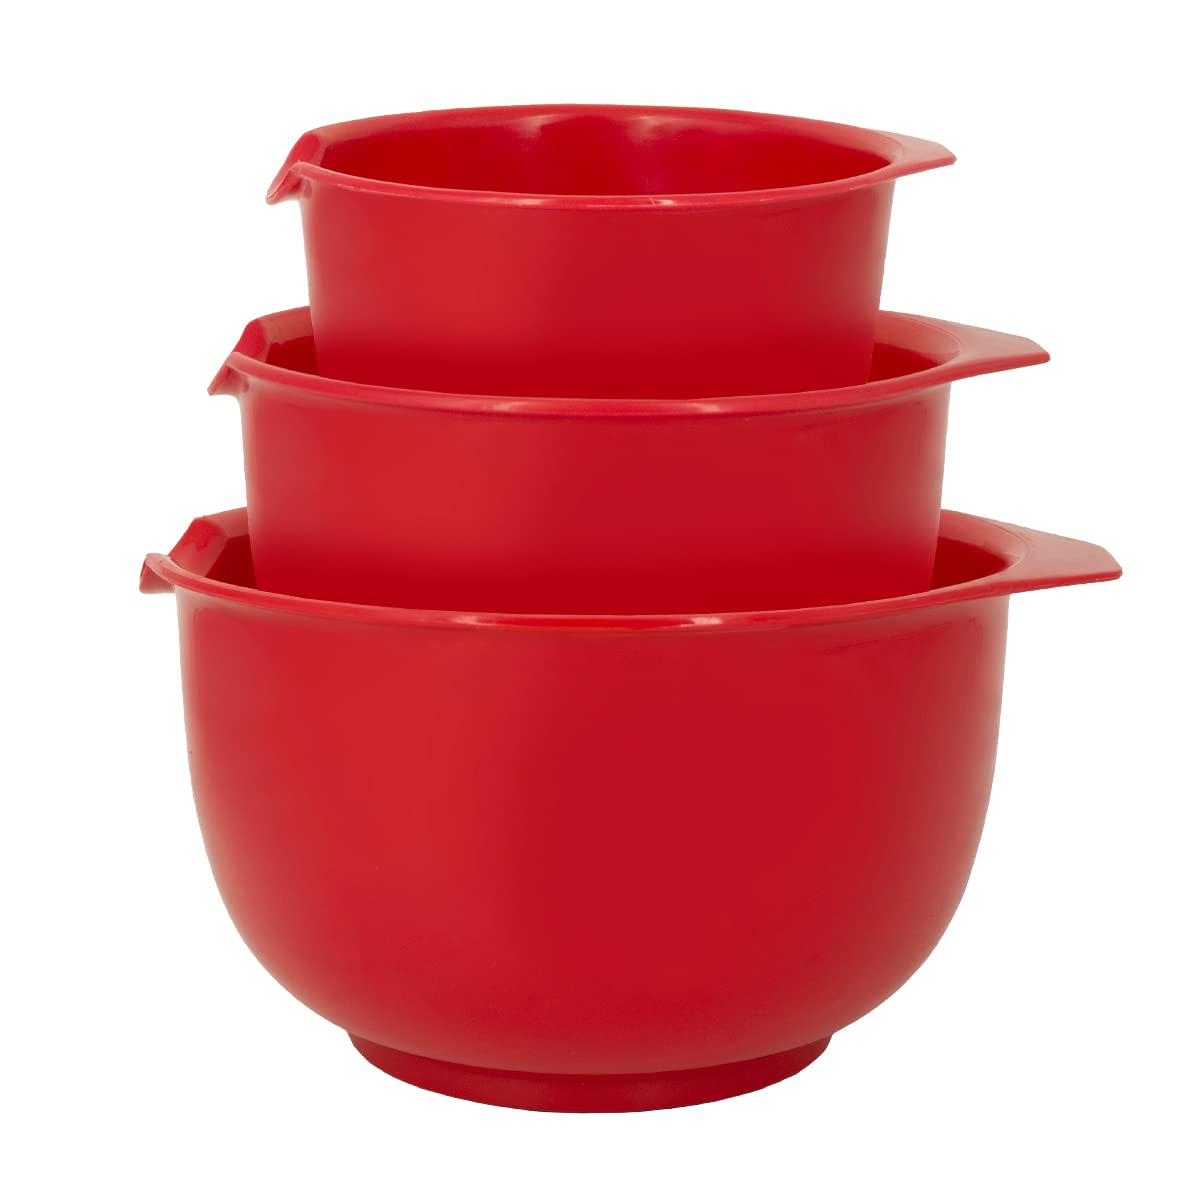 Glad Mixing Bowls with Pour Spout, Set of 3 | Nesting Design Saves Space | Non-Slip, BPA Free, Dishwasher Safe Plastic | Kitchen Cooking and Baking Supplies, Red